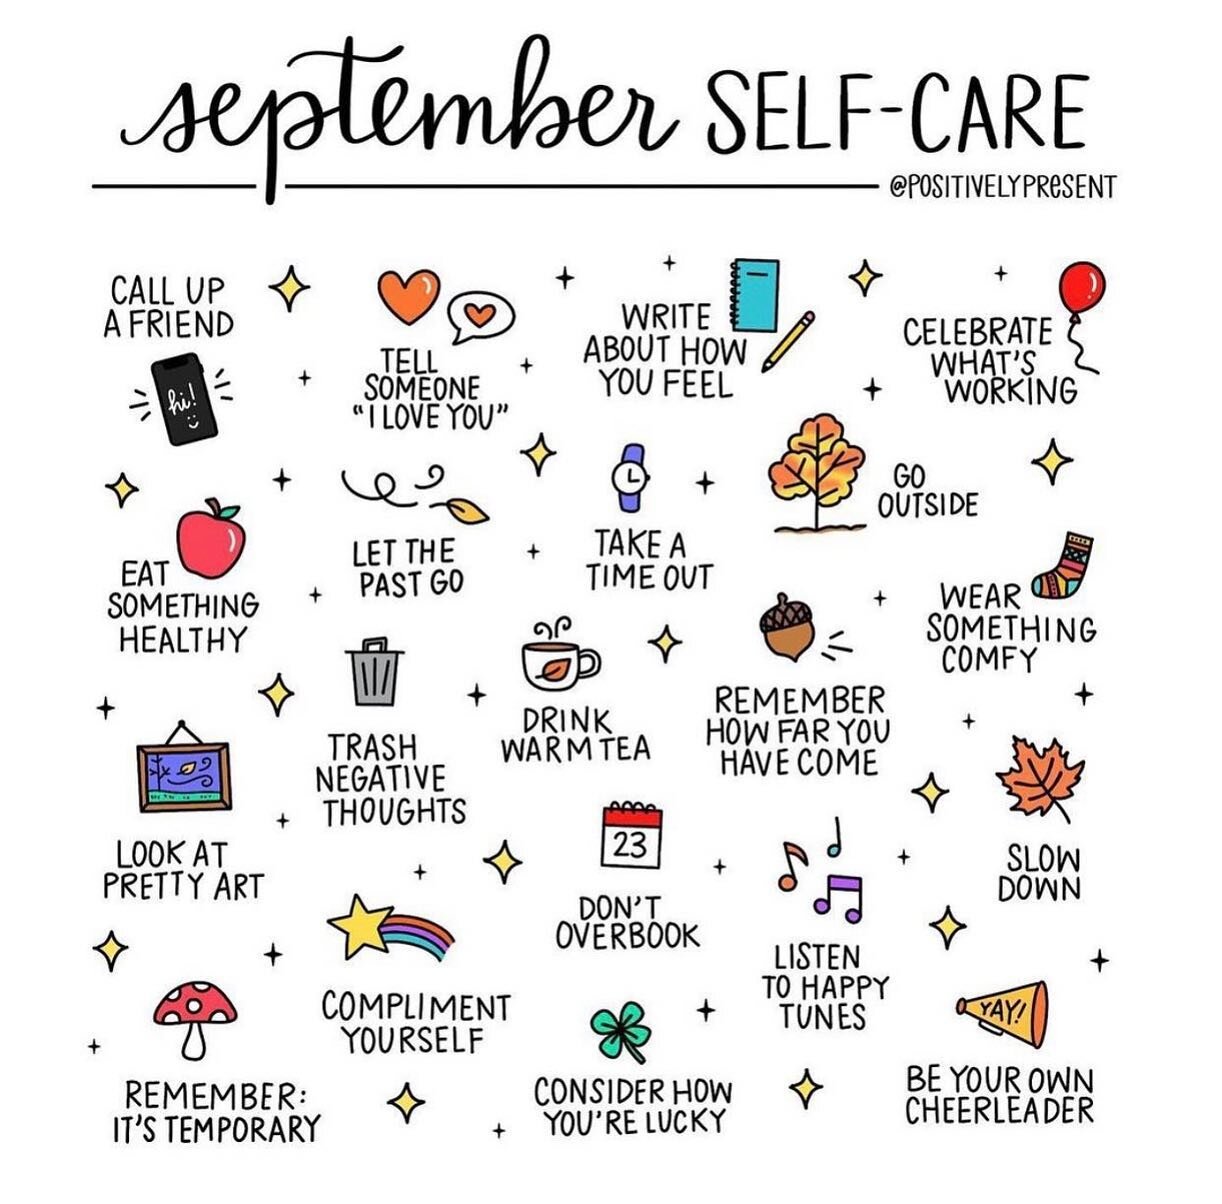 Good morning sis!! September already?! As we say goodbye to summer and transition into autumn&hellip;here are a few ideas to set your intentions for the month!

It&rsquo;s time to FALL 🍂🍁 back in love with taking care of yourself. You deserve it!! 